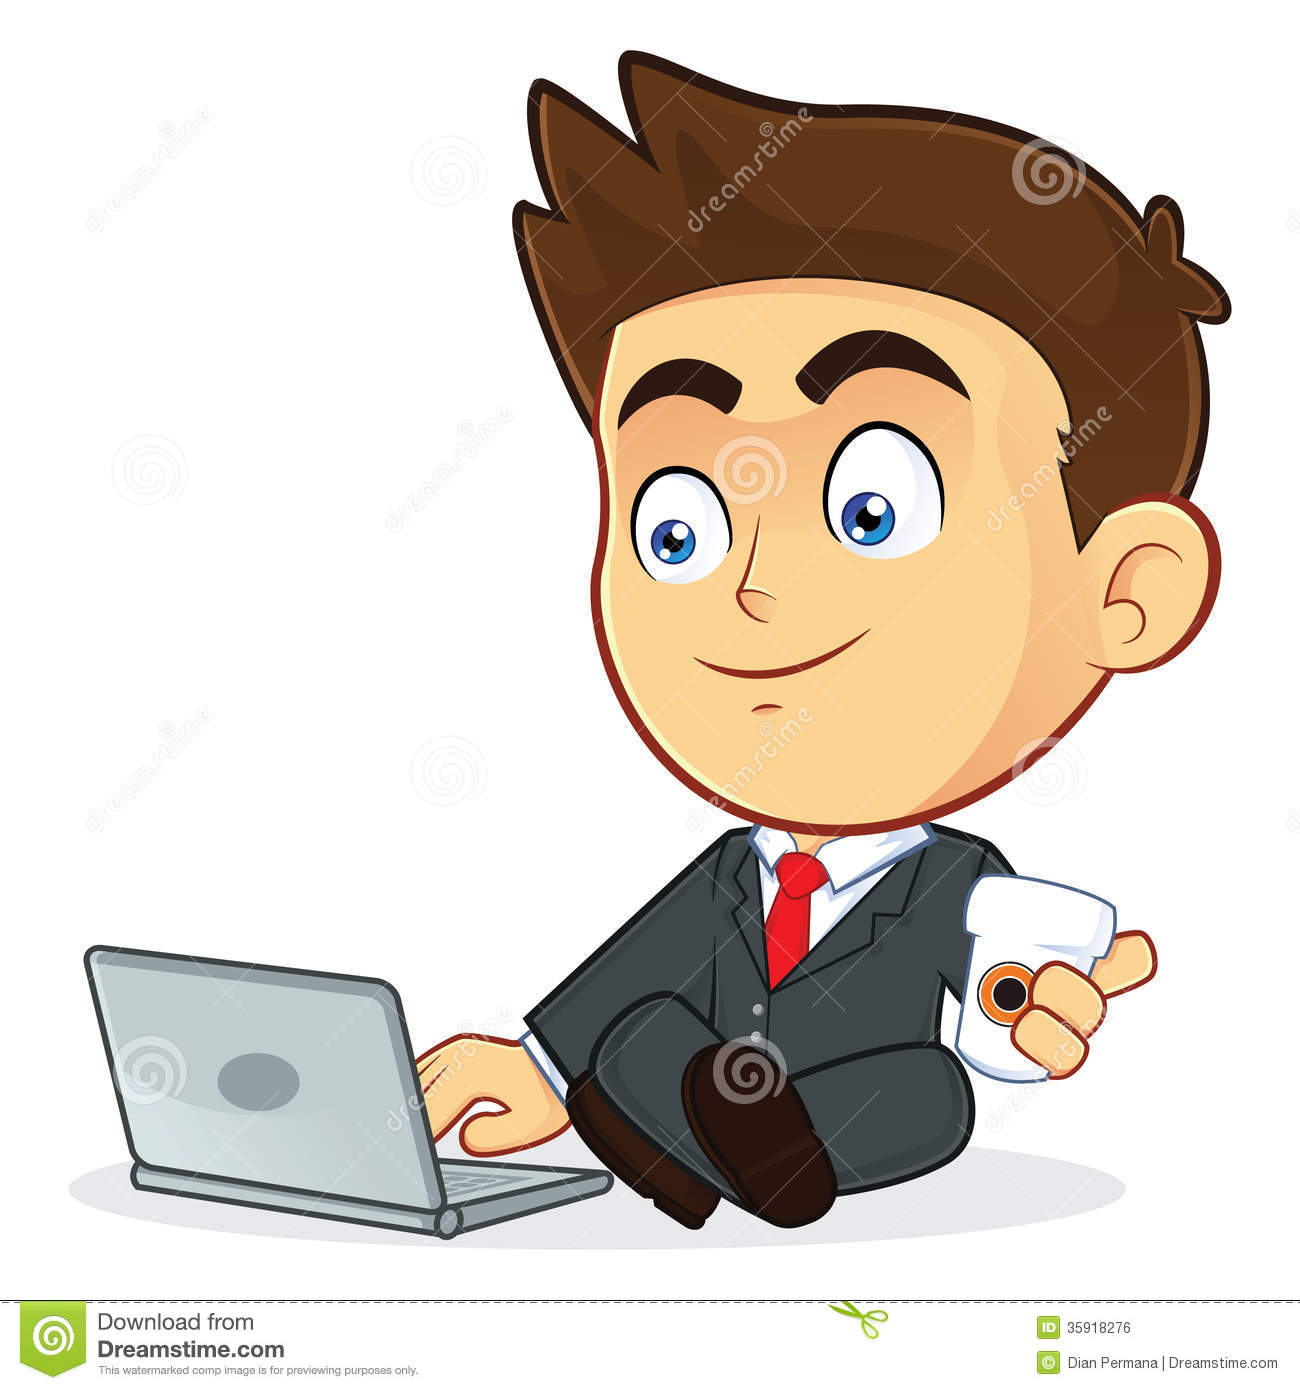 Businessman With His Laptop Royalty Free Stock Image   Image  35918276